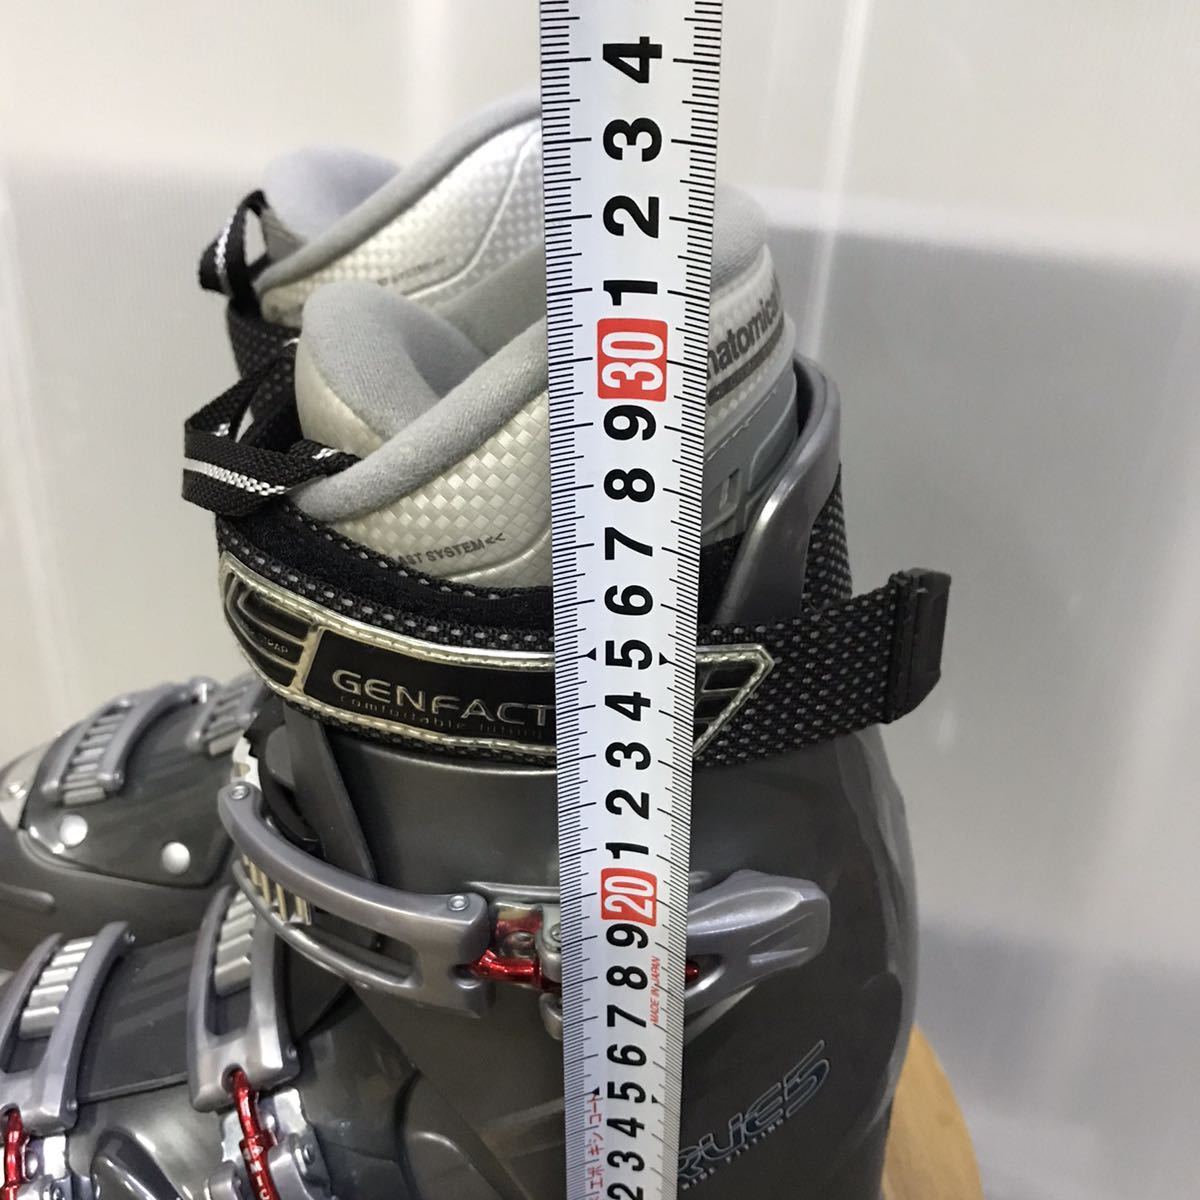 refle* ski boots GENFACTORY size 6 24cm about? storage bag attaching present condition goods [C]